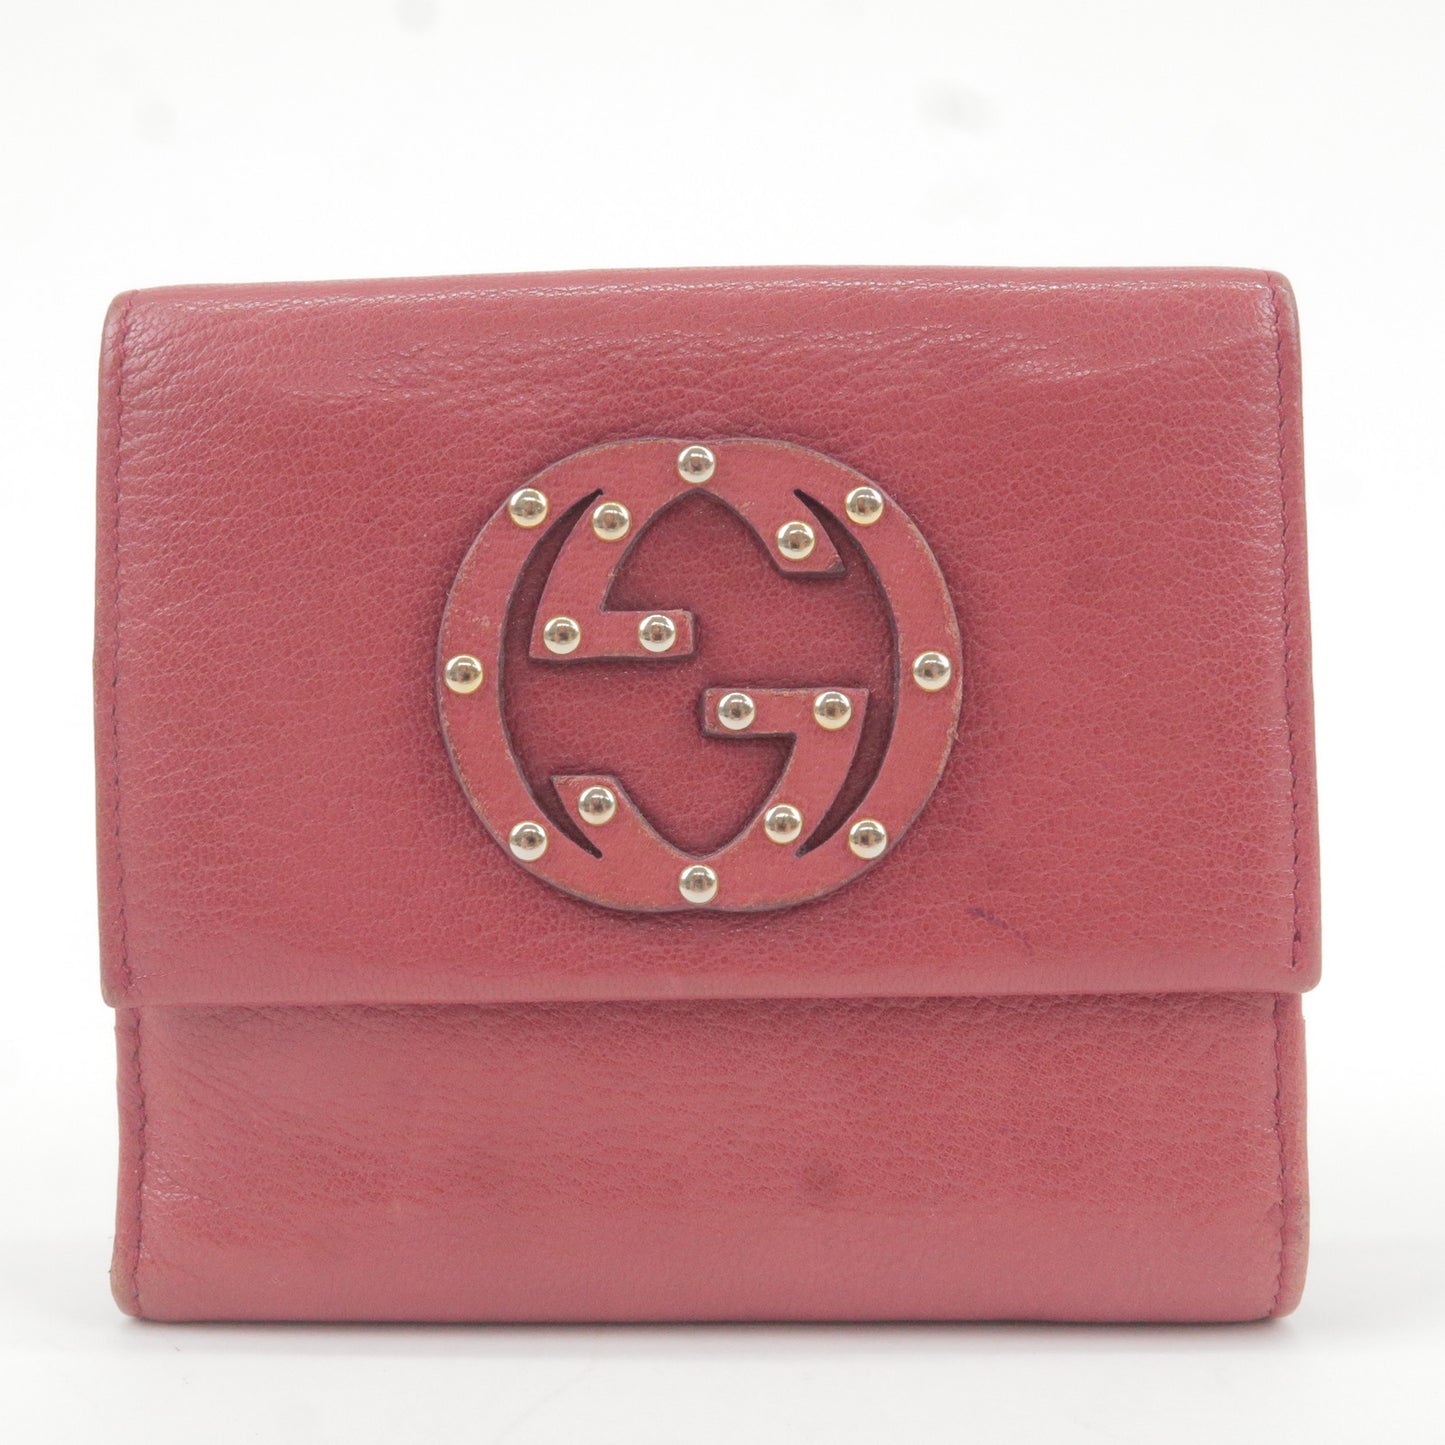 Gucci Set of 2 Leather Long Wallet and Small Wallet 121568 212110